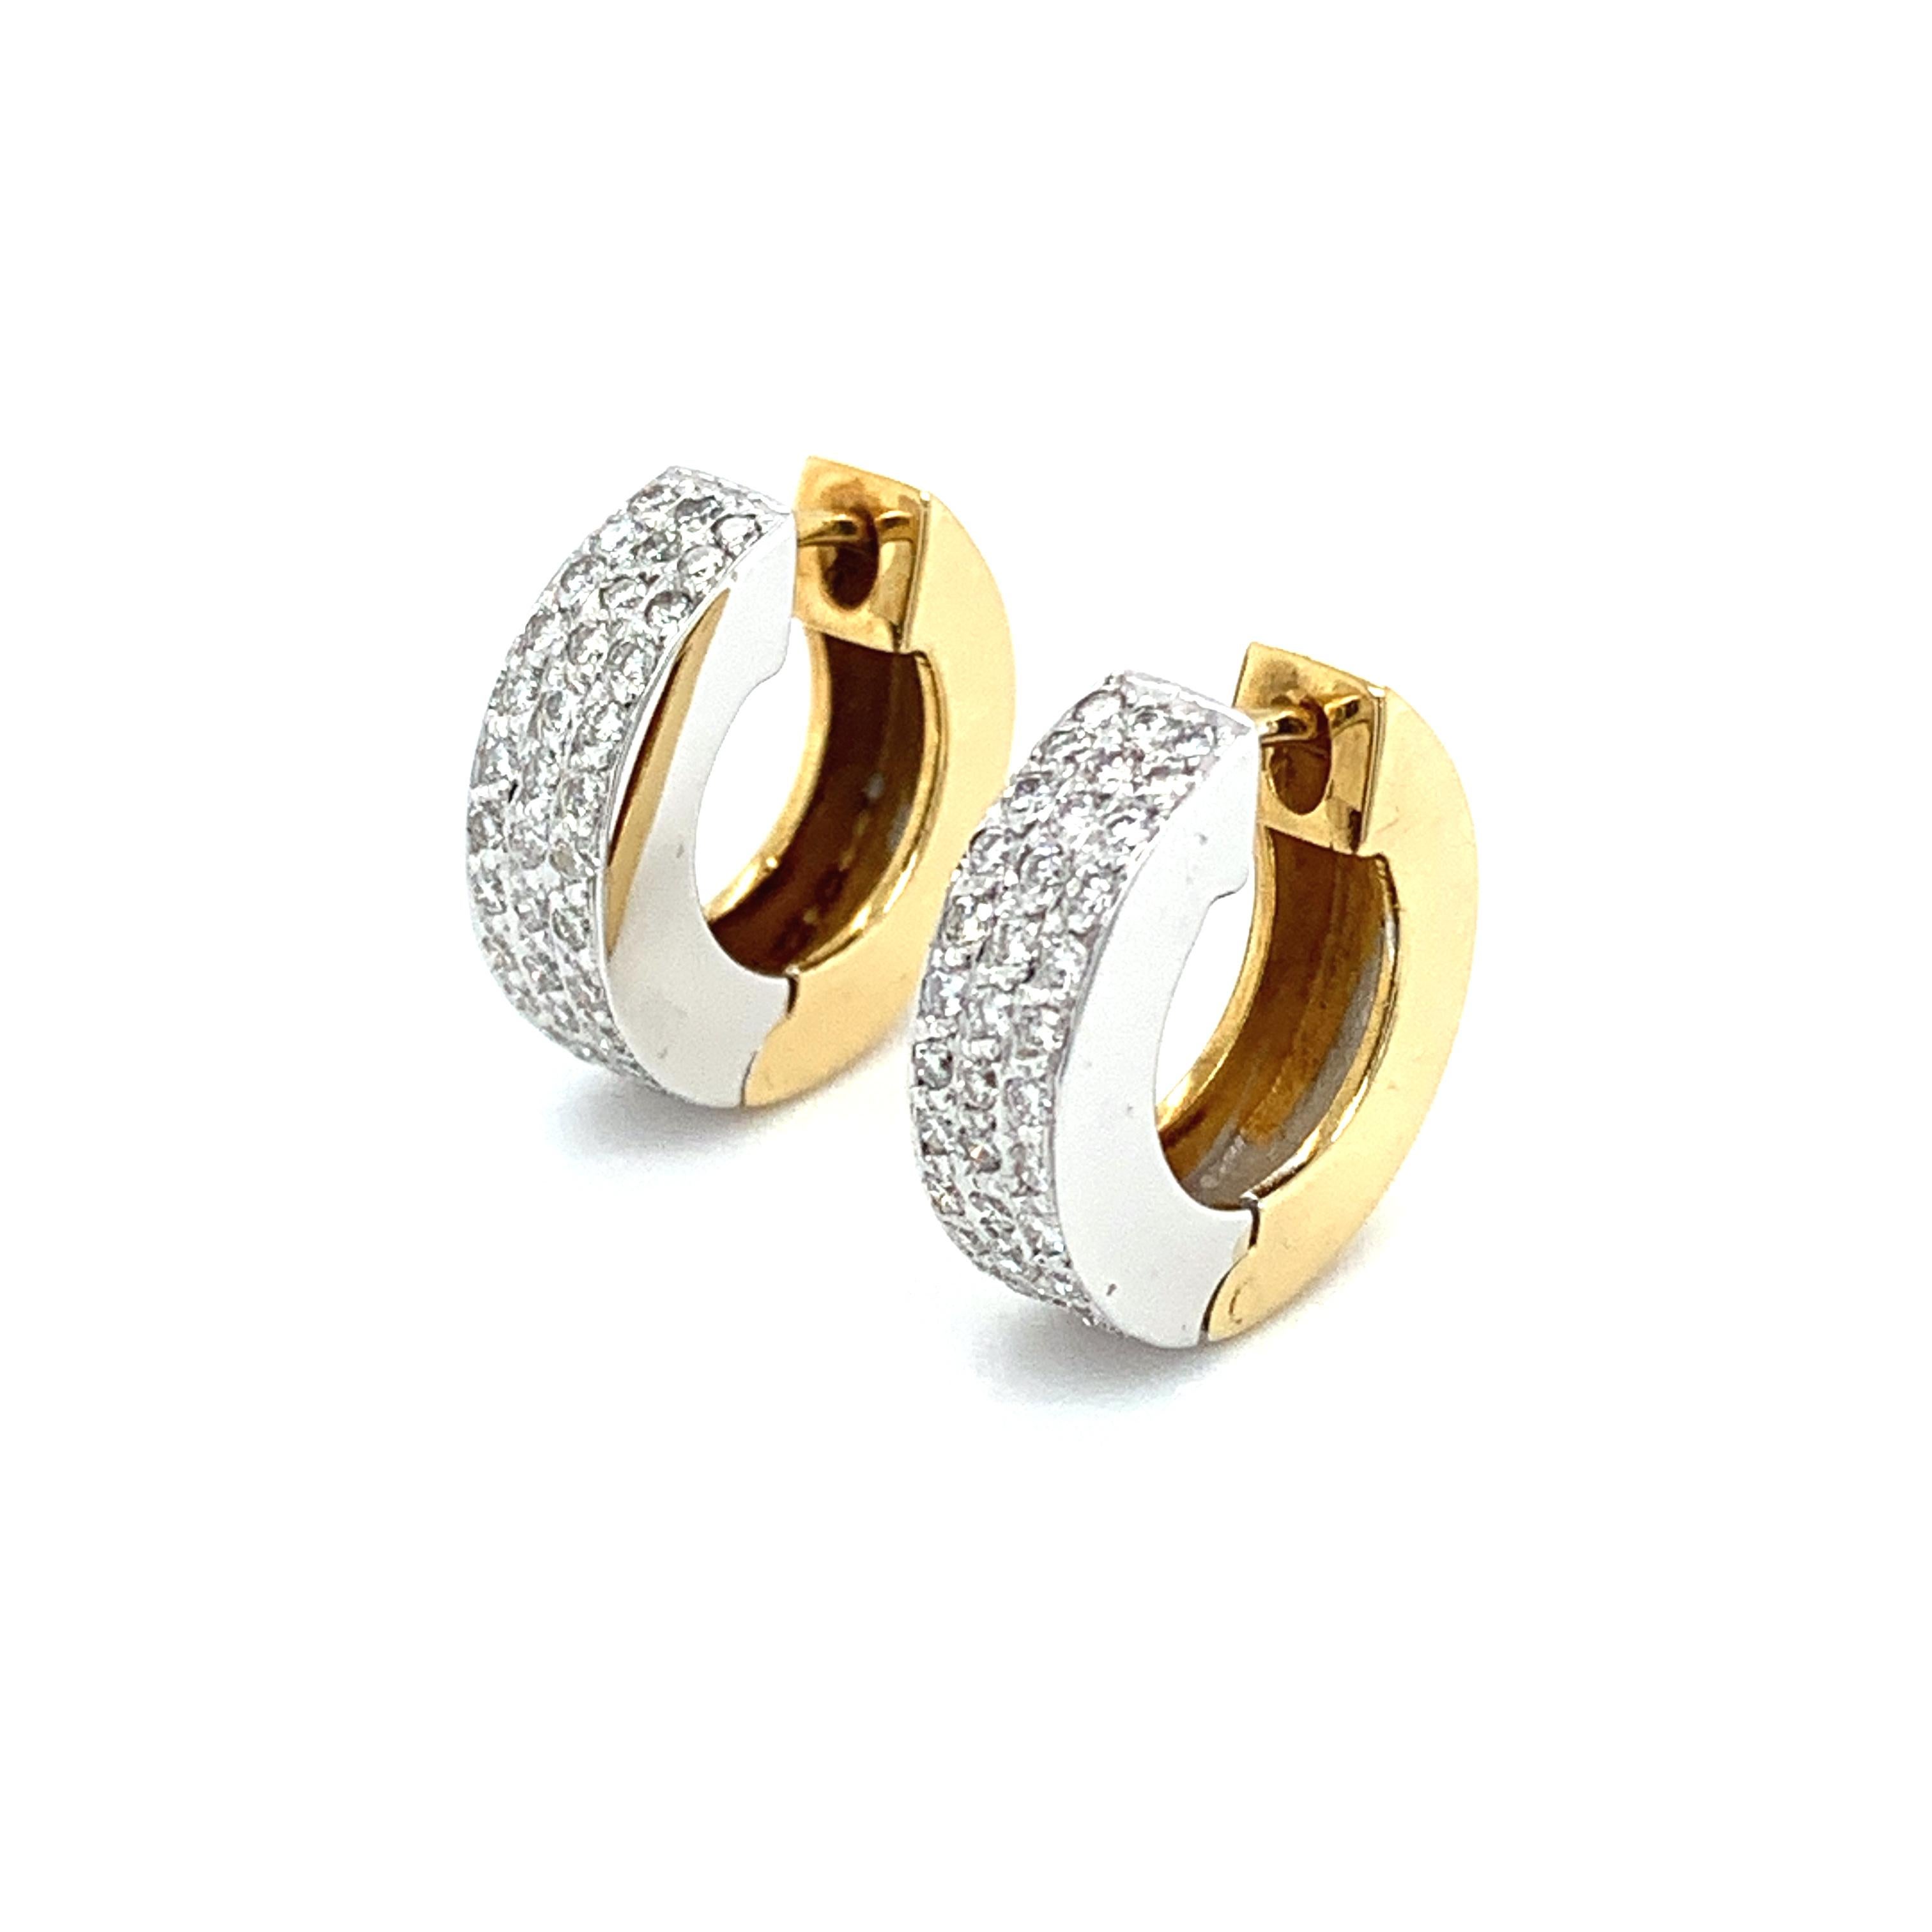 Diamond pave hoops huggies clip earrings 18k yellow and white gold
Composed of 0.80ct round brilliant diamond cut pave setting hoops clip on earrings in 18k white and yellow gold.
Combination of 18k yellow an d white gold chunky look hoops